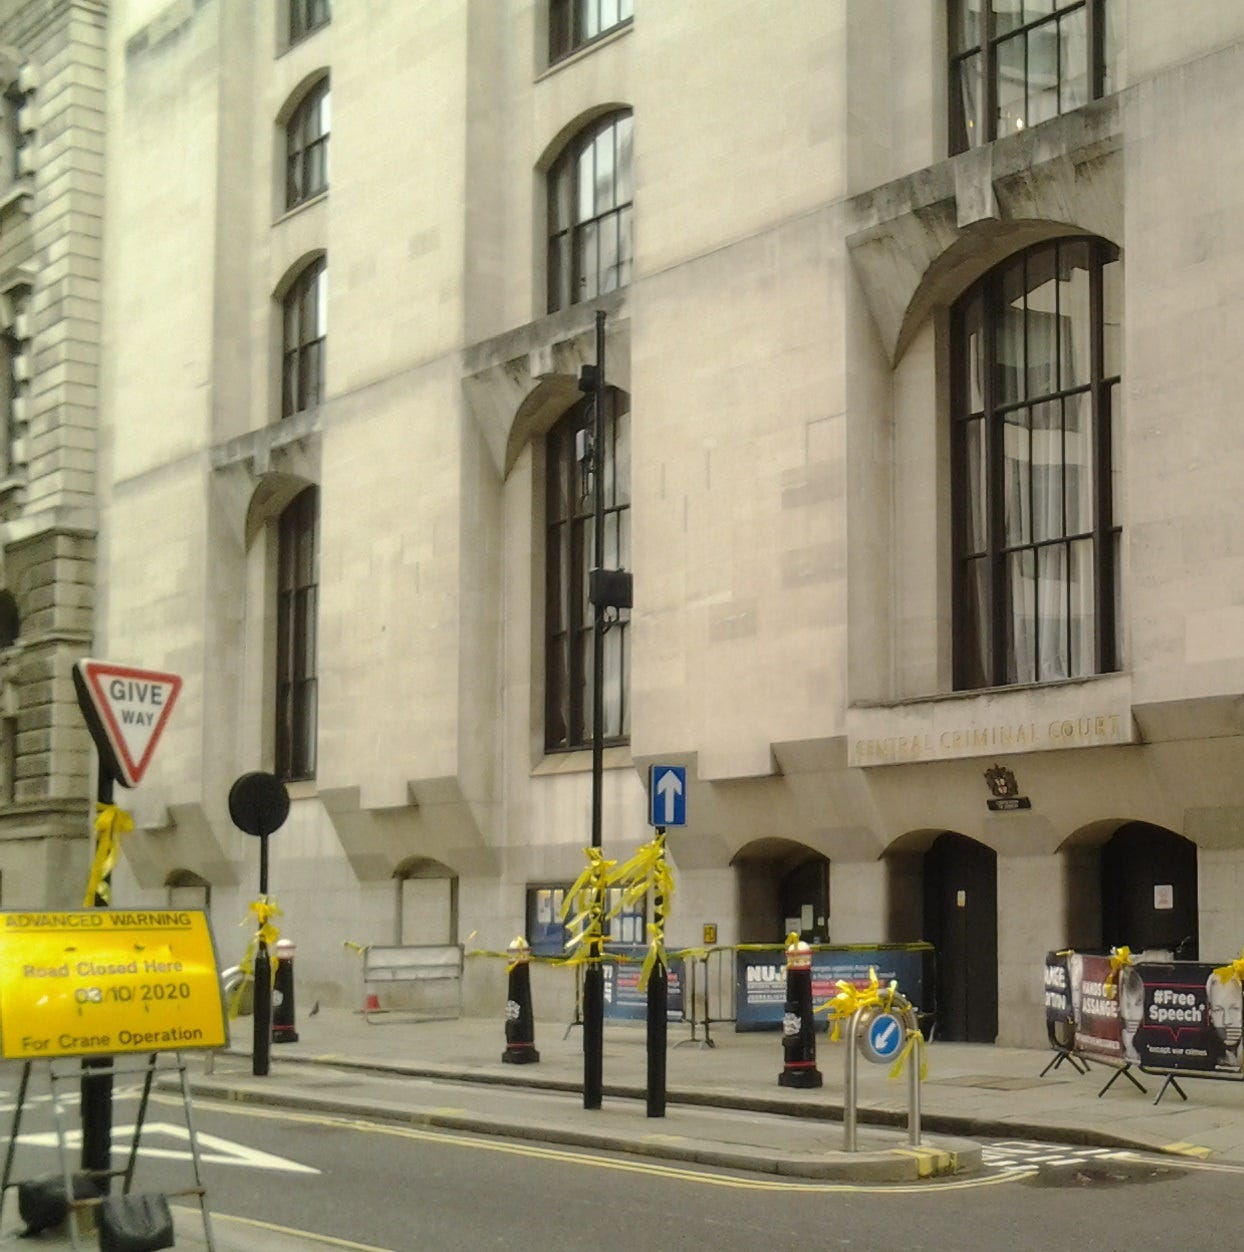 Old Bailey, London, with yellow ribbons tied on lampposts and banners in support of Julian Assange